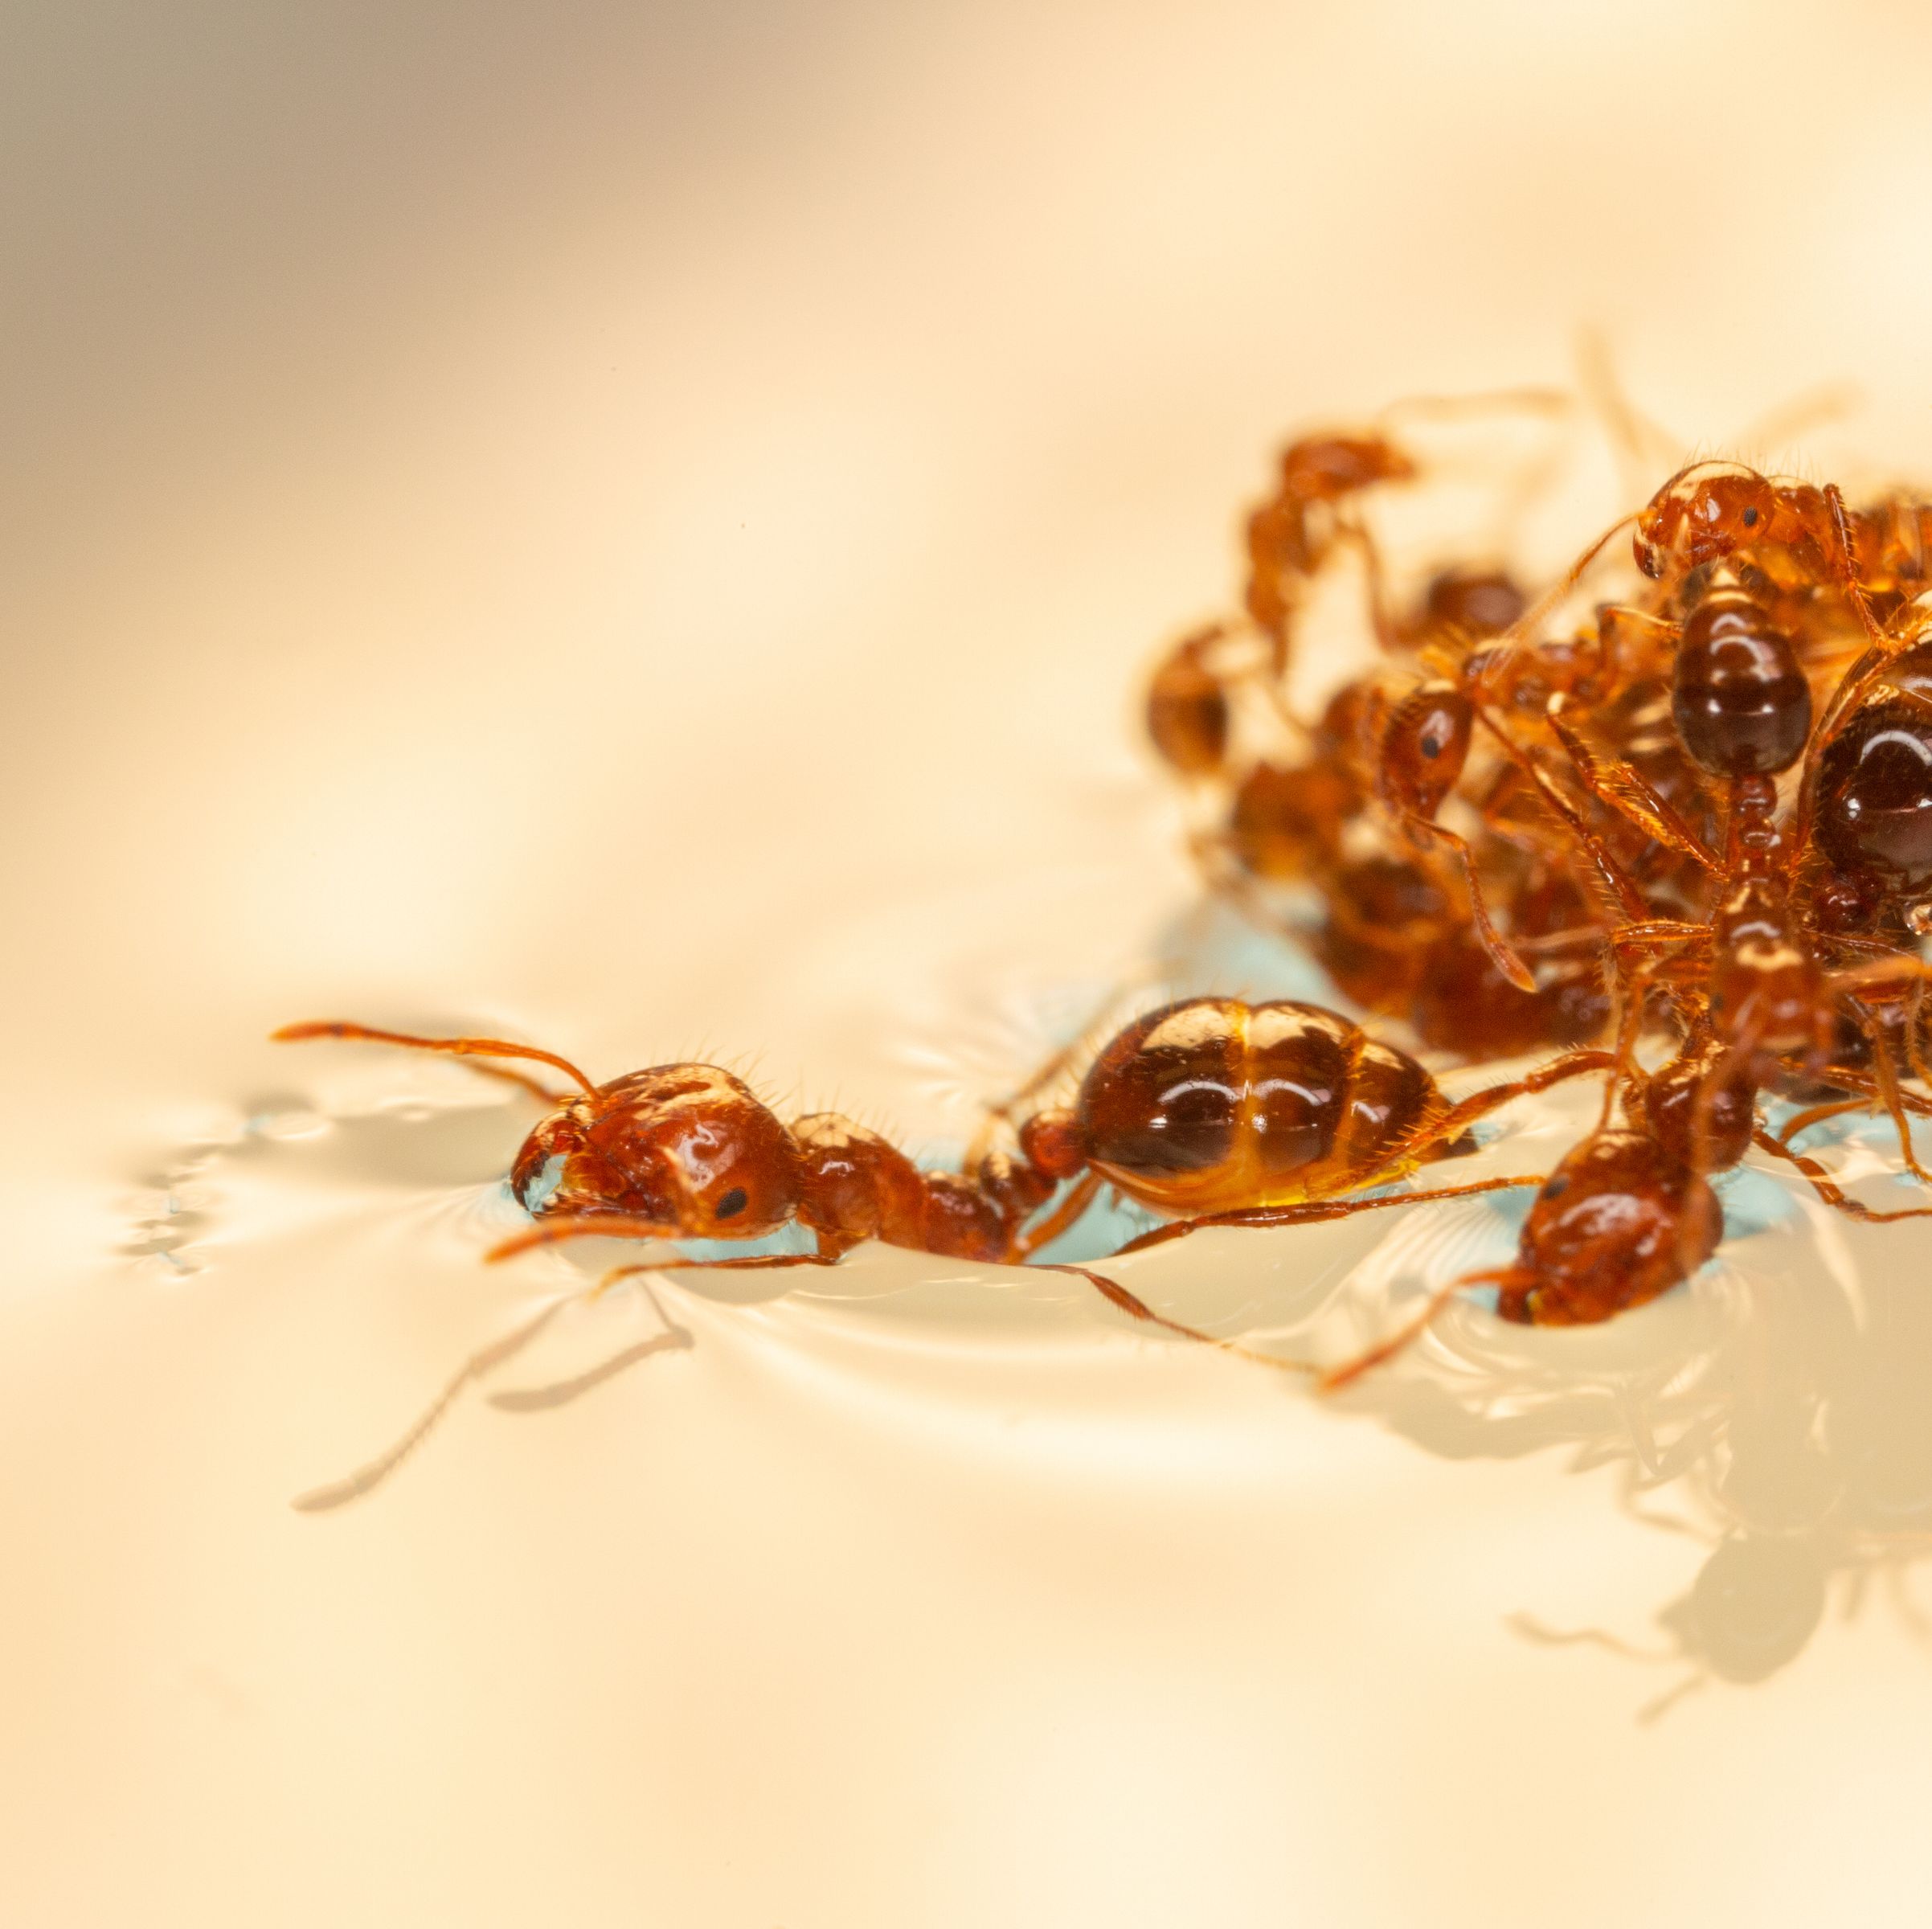 Cheerios and Fire Ants Have More in Common Than You Think